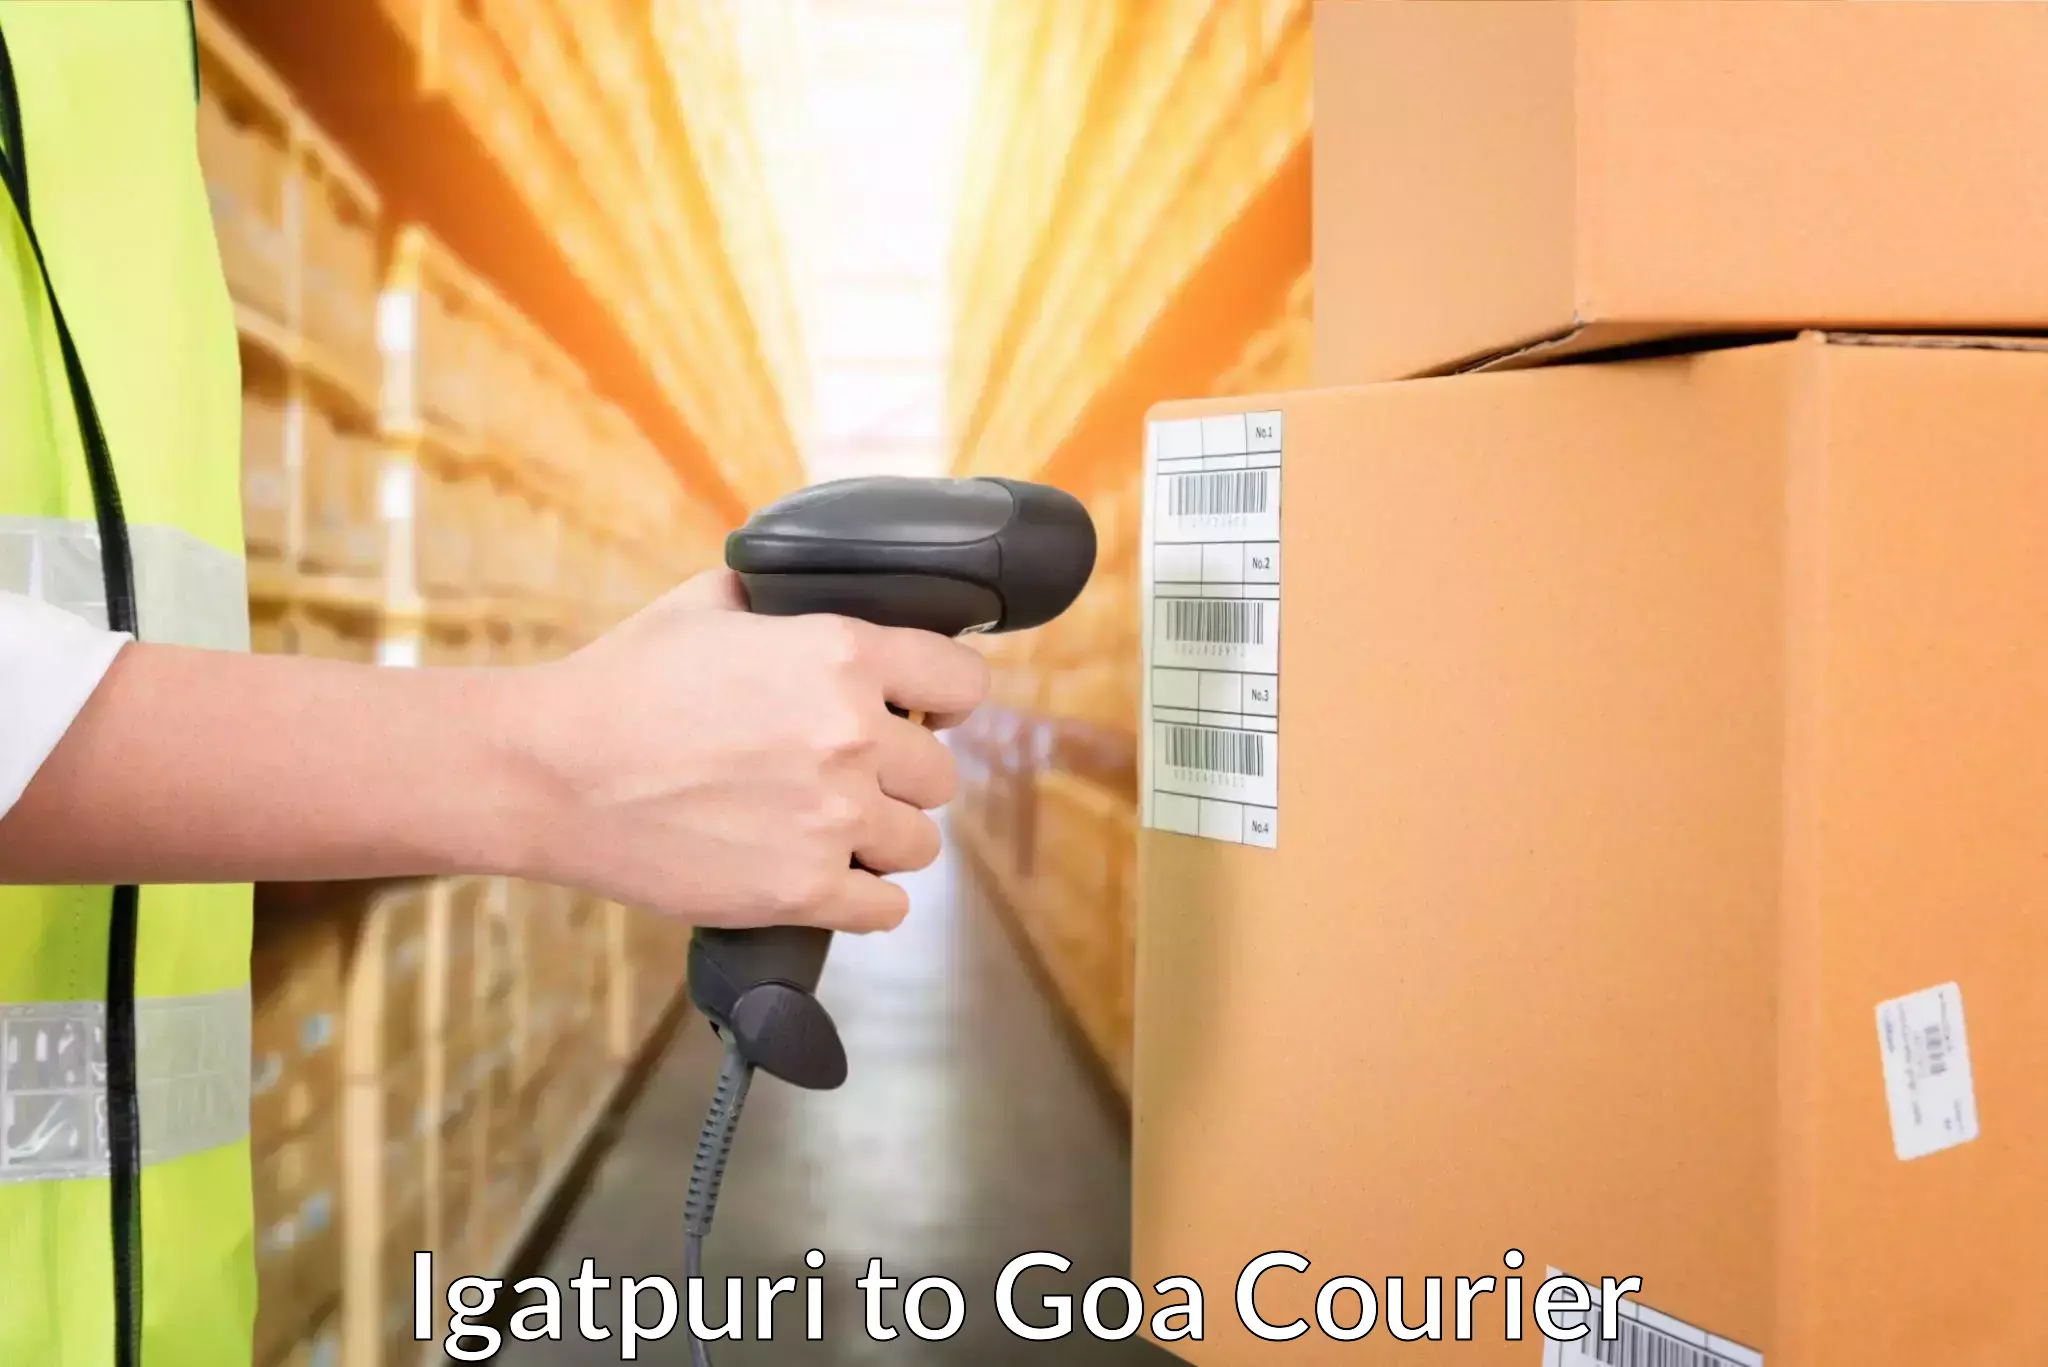 Business delivery service Igatpuri to Goa